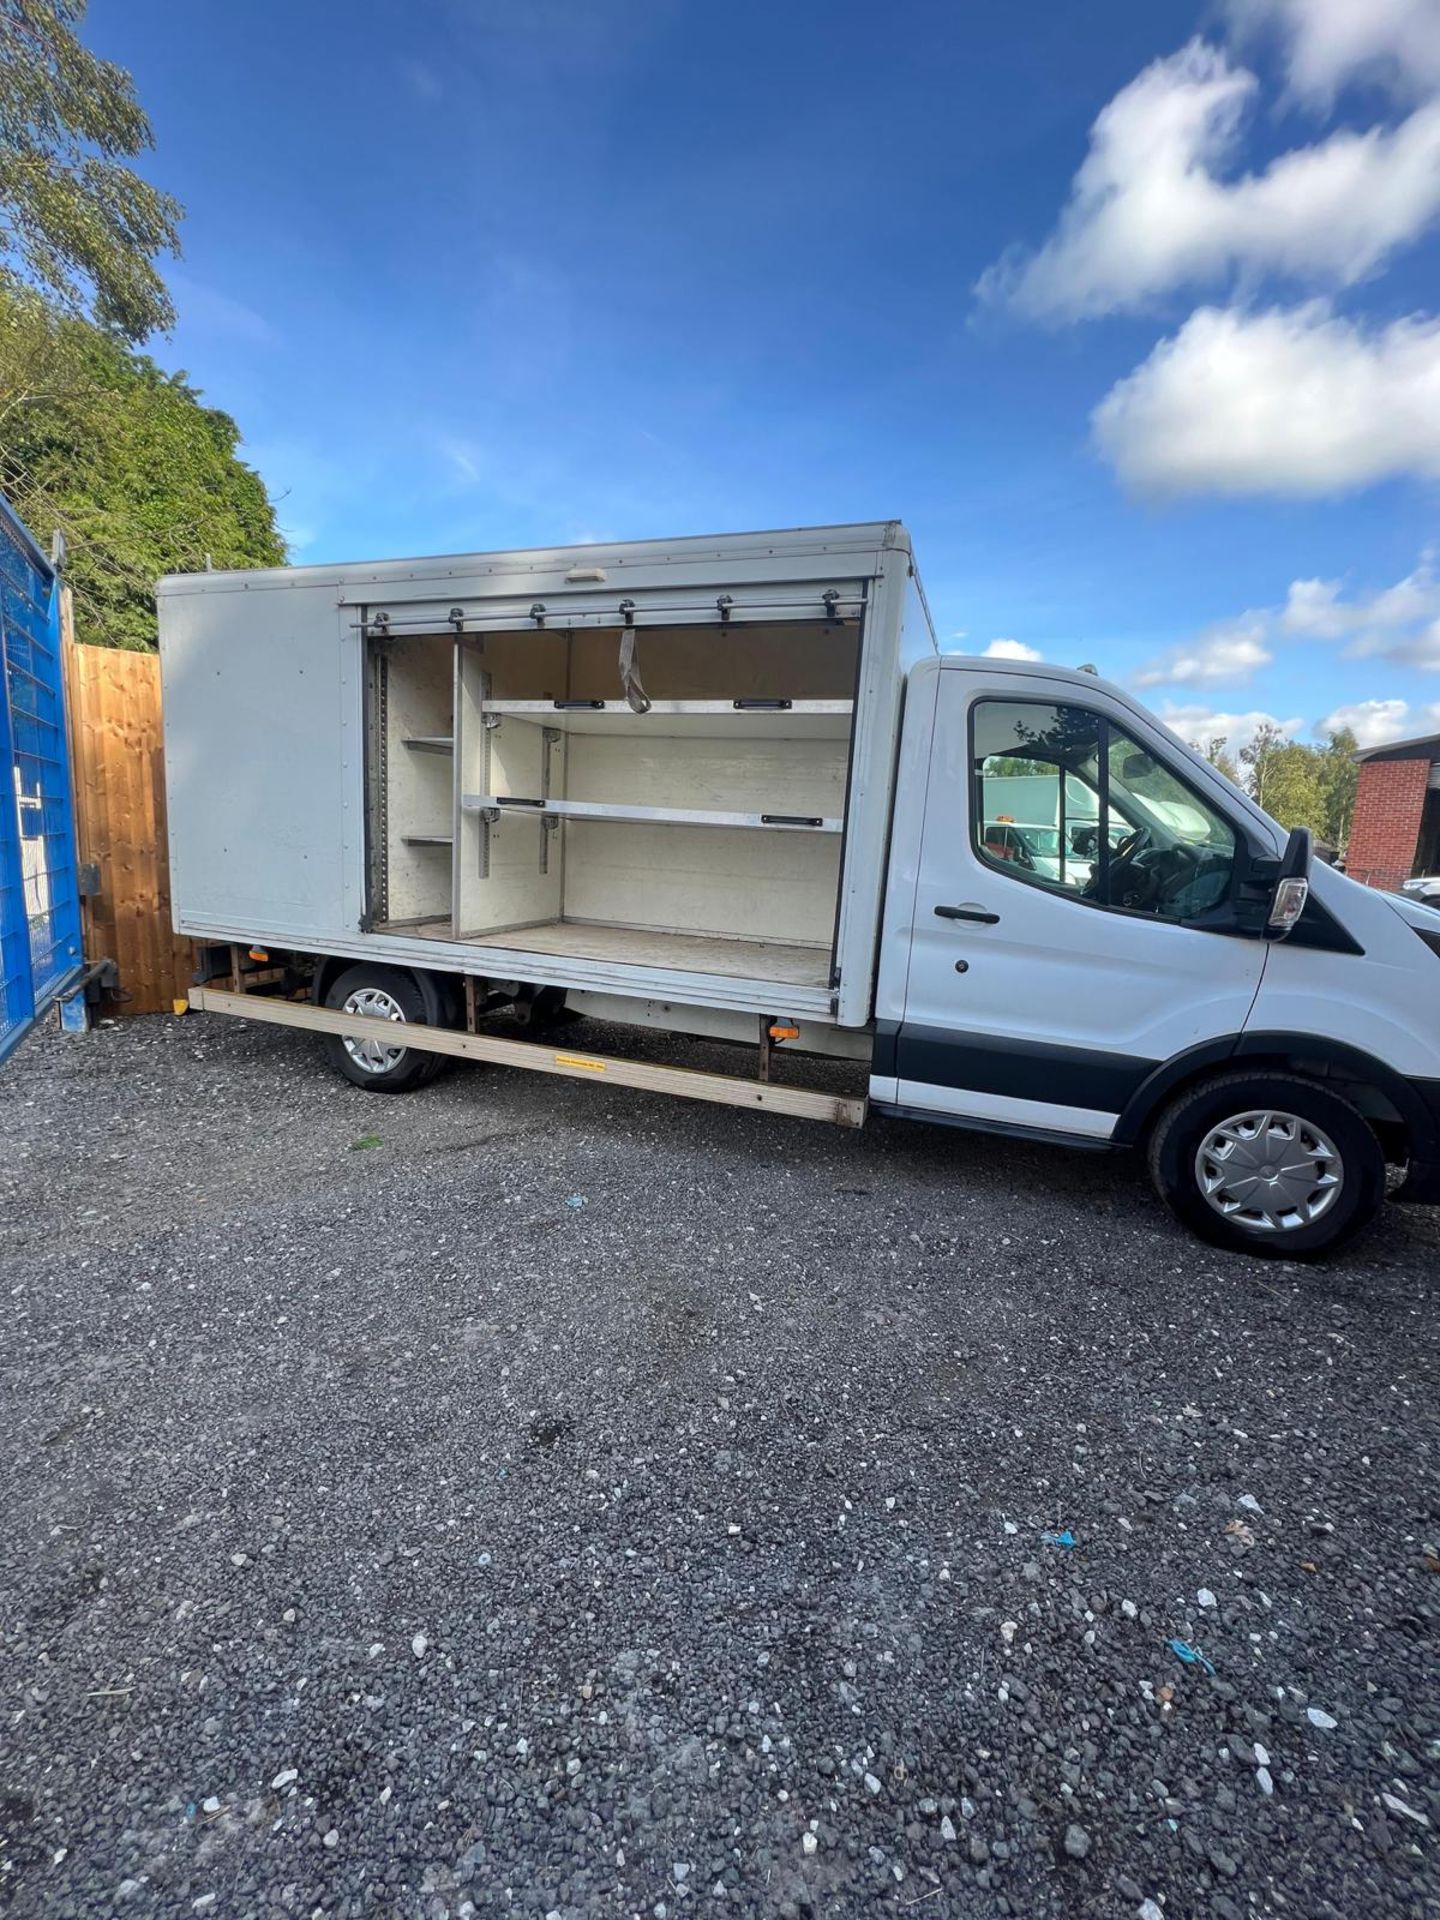 FORD TRANSIT BOX VAN 2017 LUTON EURO6 LWB 6 SPEED MANUAL 1COMPANY OWNER FROM NEW - Image 3 of 14